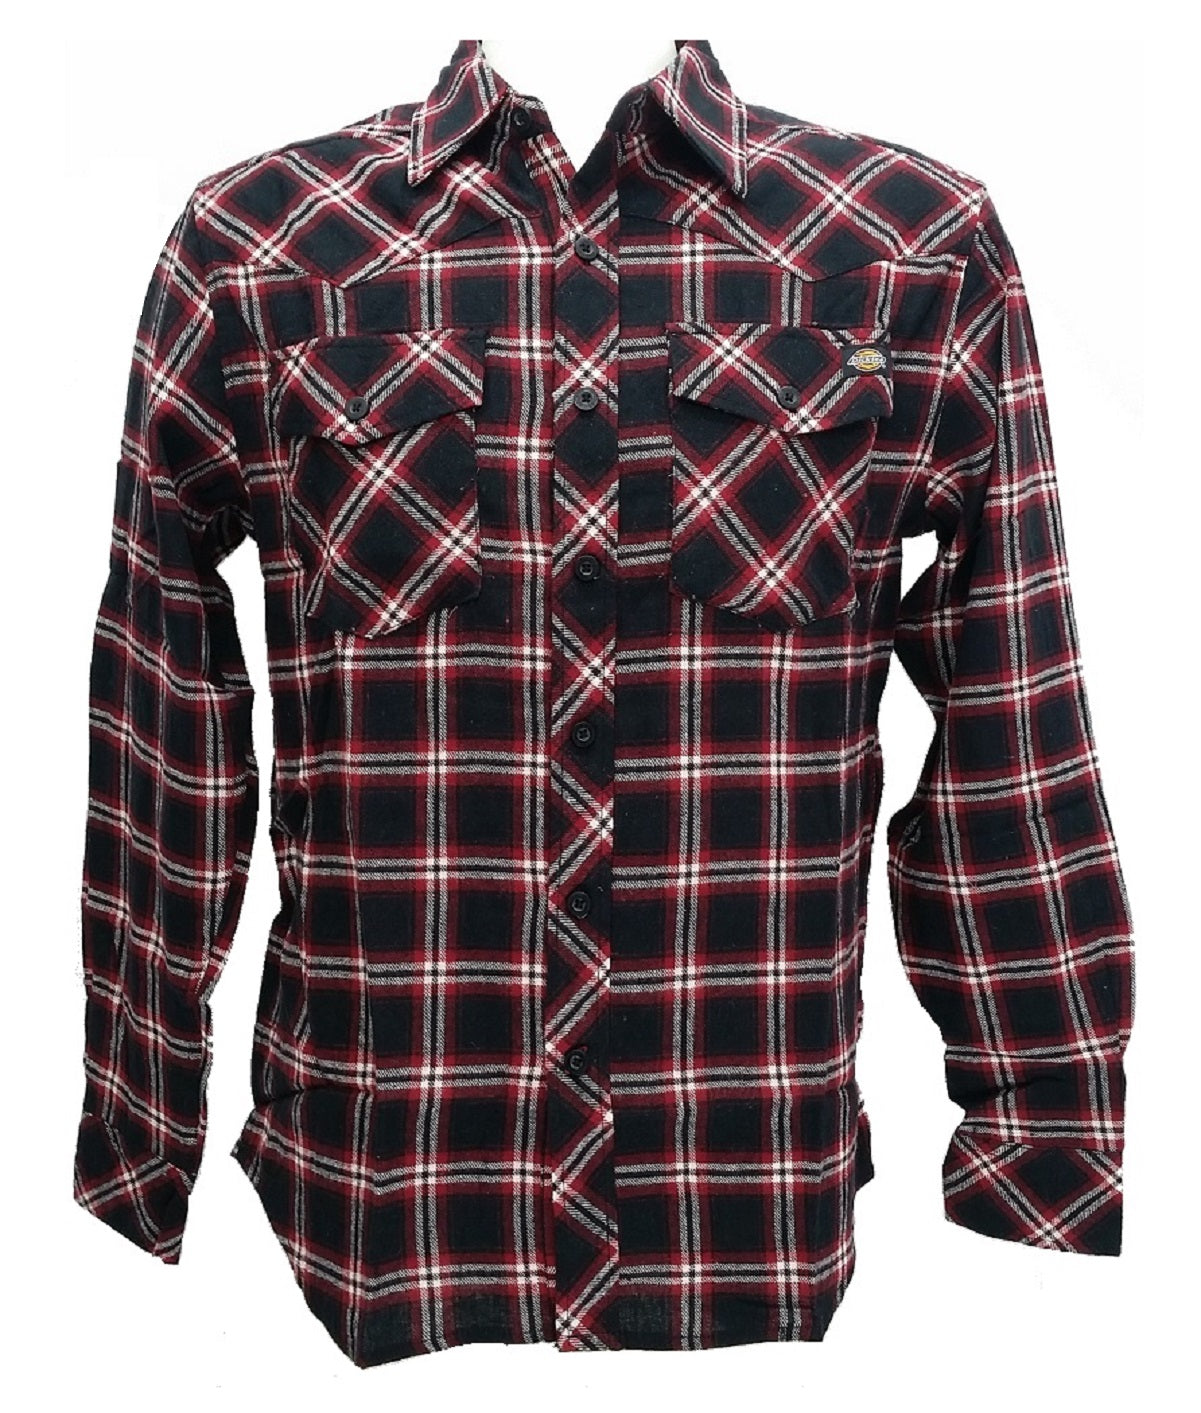 Dickies Men's Flannel Long Sleeve Button Down Shirt Black with Red, Small